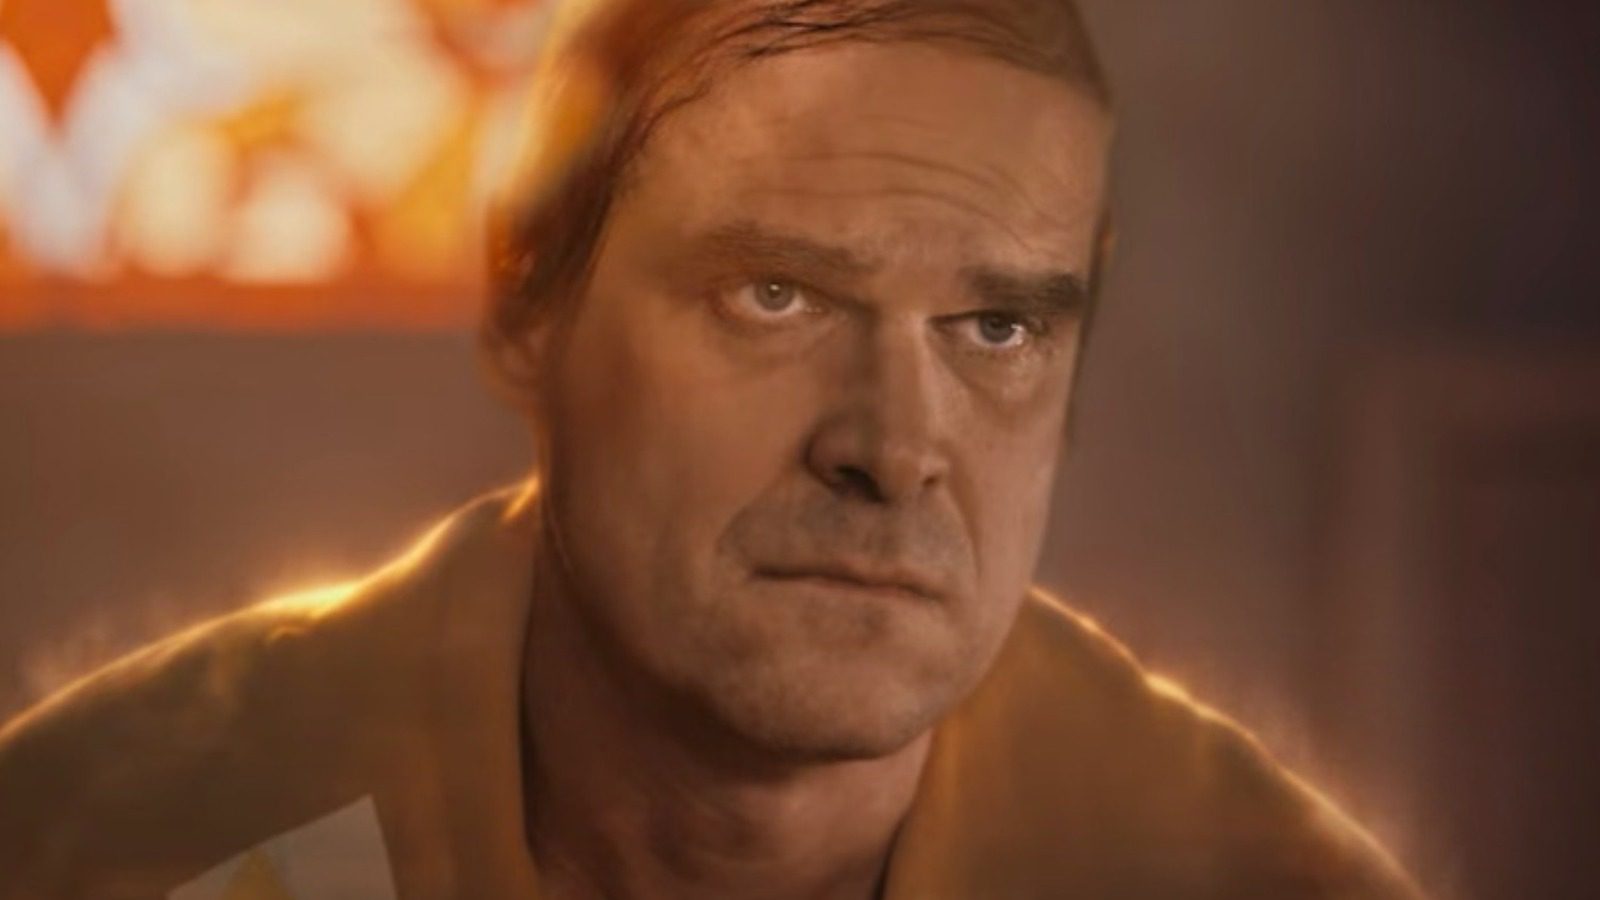 Playing Ernest In We Have A Ghost 'Scared' David Harbour Because Of His Lack Of Dialogue